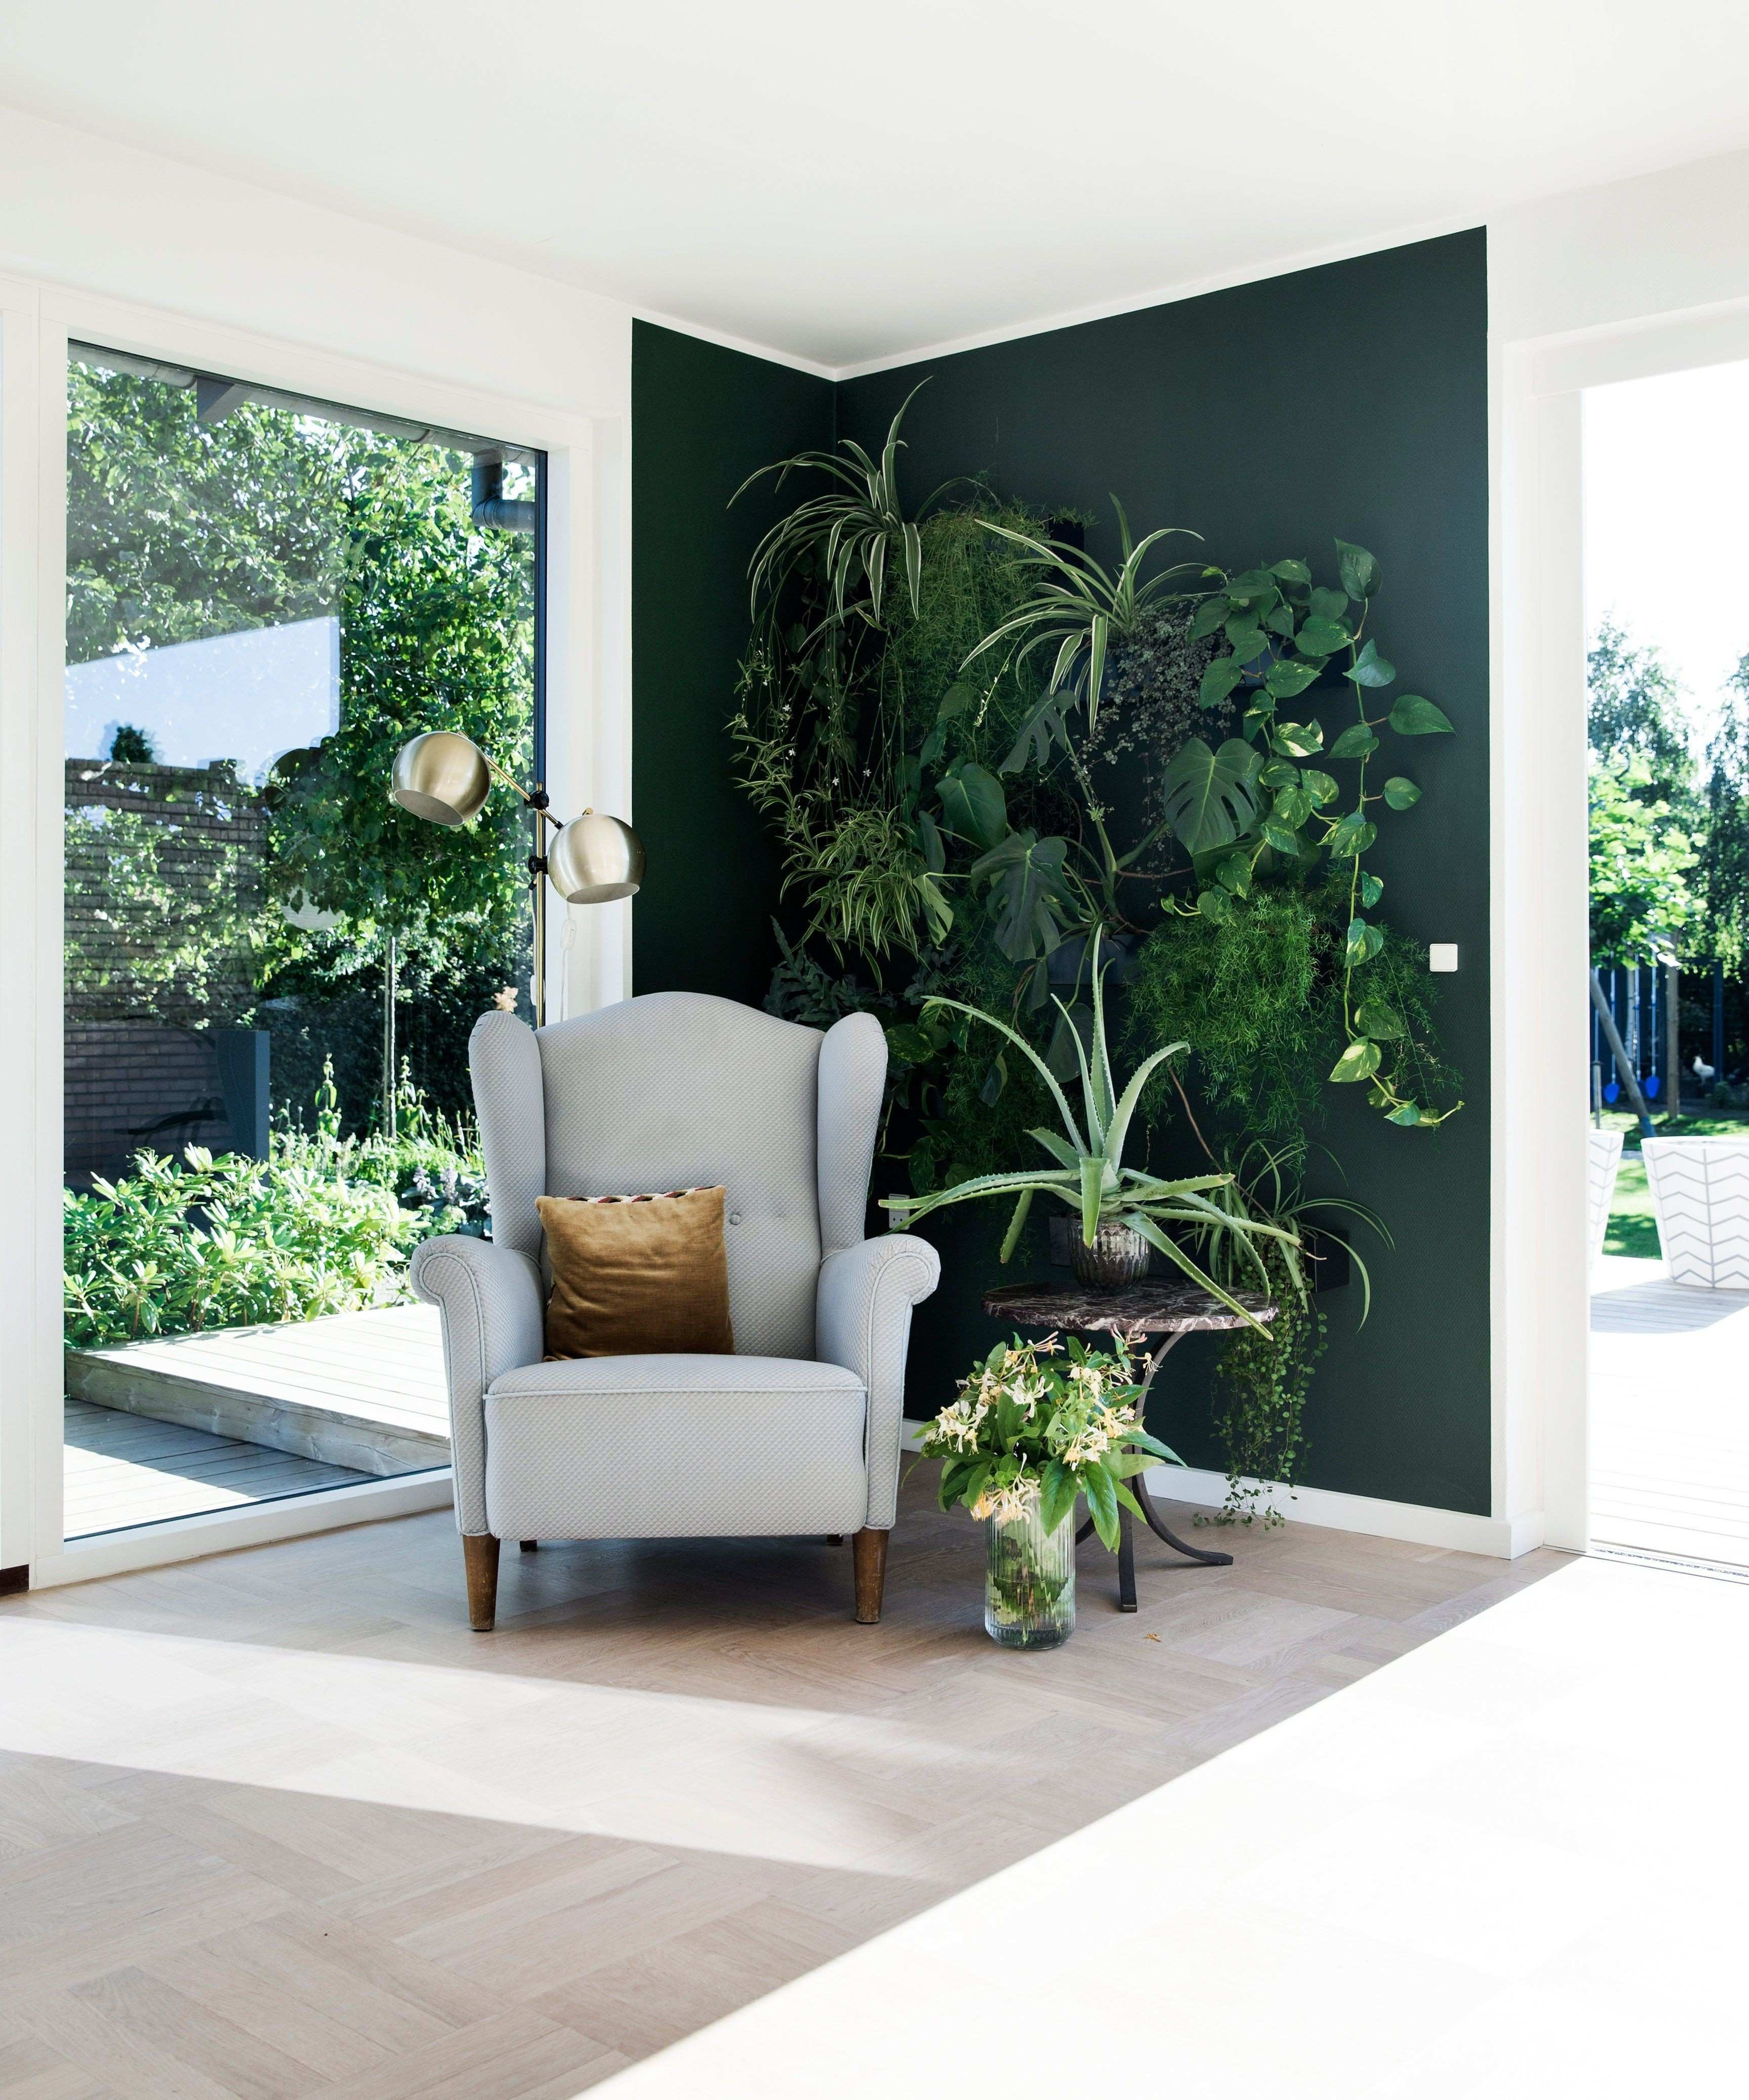 10 Fabulous Modern Wall Vase 2024 free download modern wall vase of decorating ideas for living rooms with green walls inspirational big throughout decorating ideas for living rooms with green walls inspirational 5 cool design trends ing 